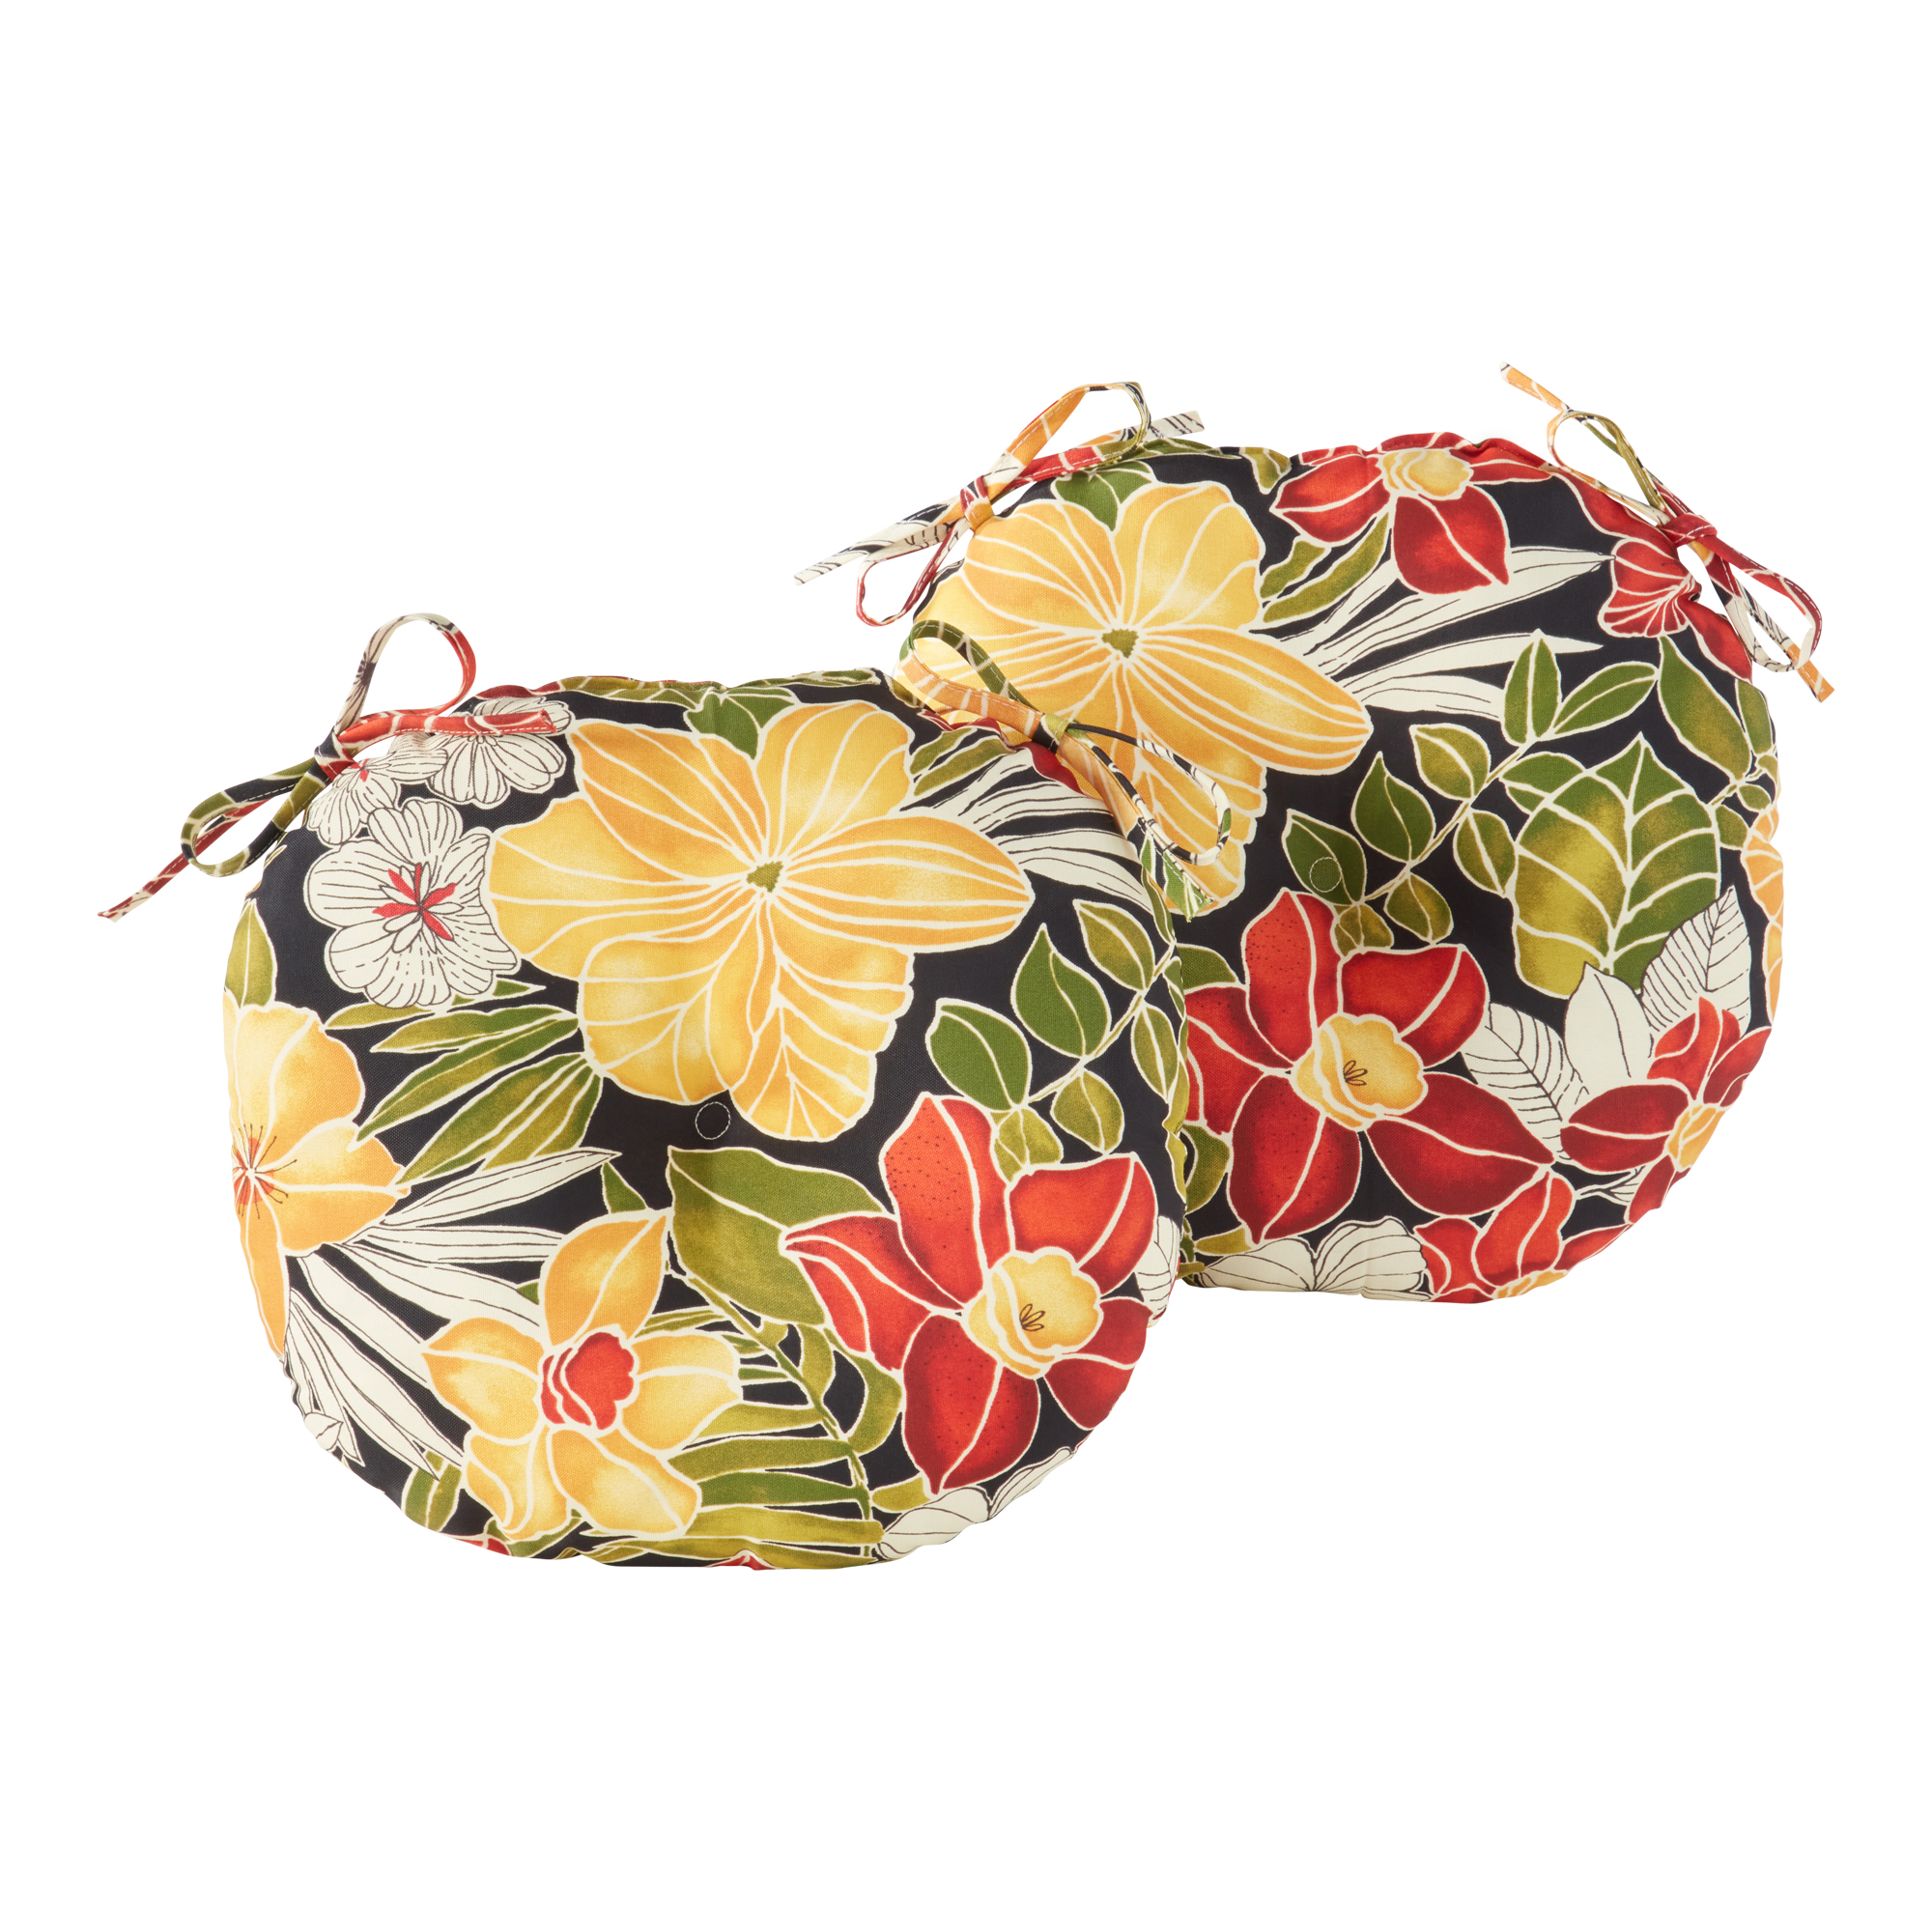 Greendale Home Fashions Aloha Black Floral 15 in. Round Outdoor Reversible Bistro Seat Cushion (Set of 2) - image 1 of 5